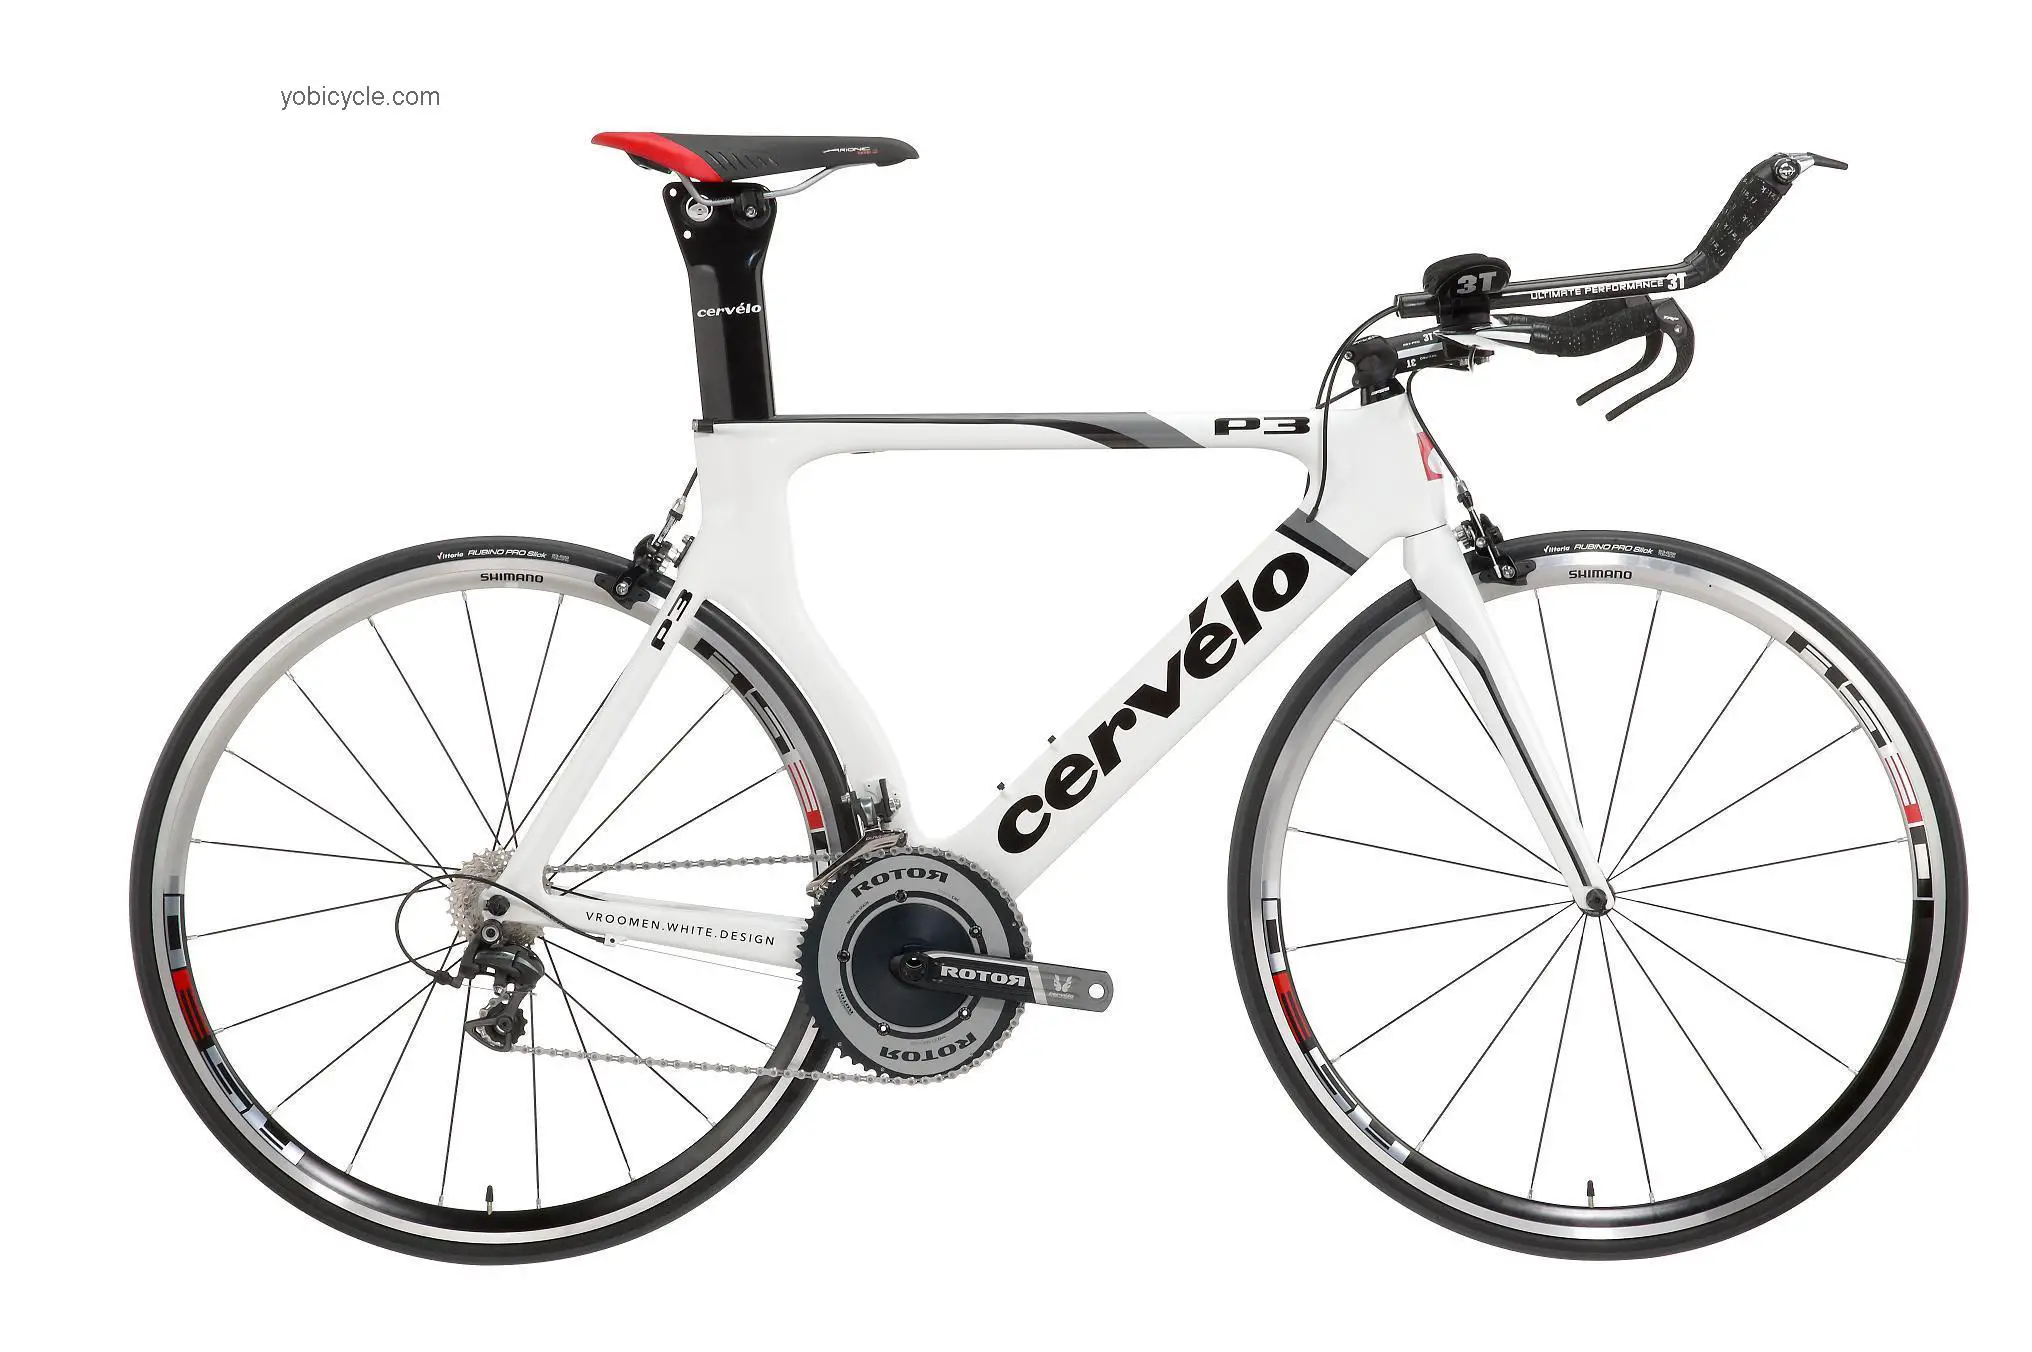 Cervelo P3 competitors and comparison tool online specs and performance